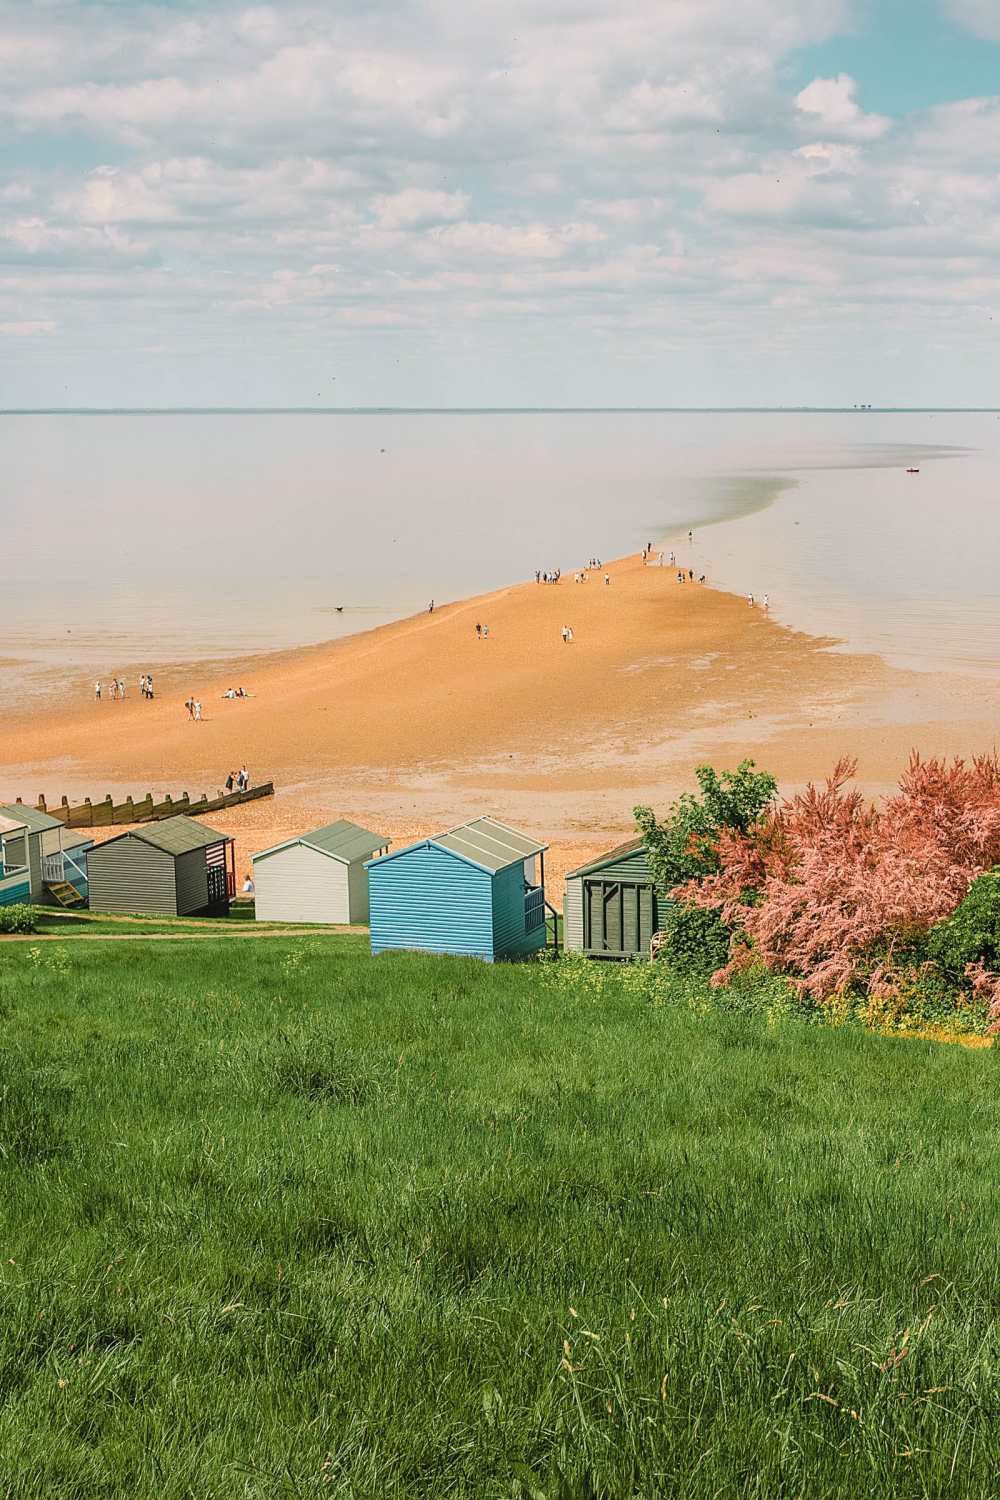 Best Beaches Near London To Visit Whitstable